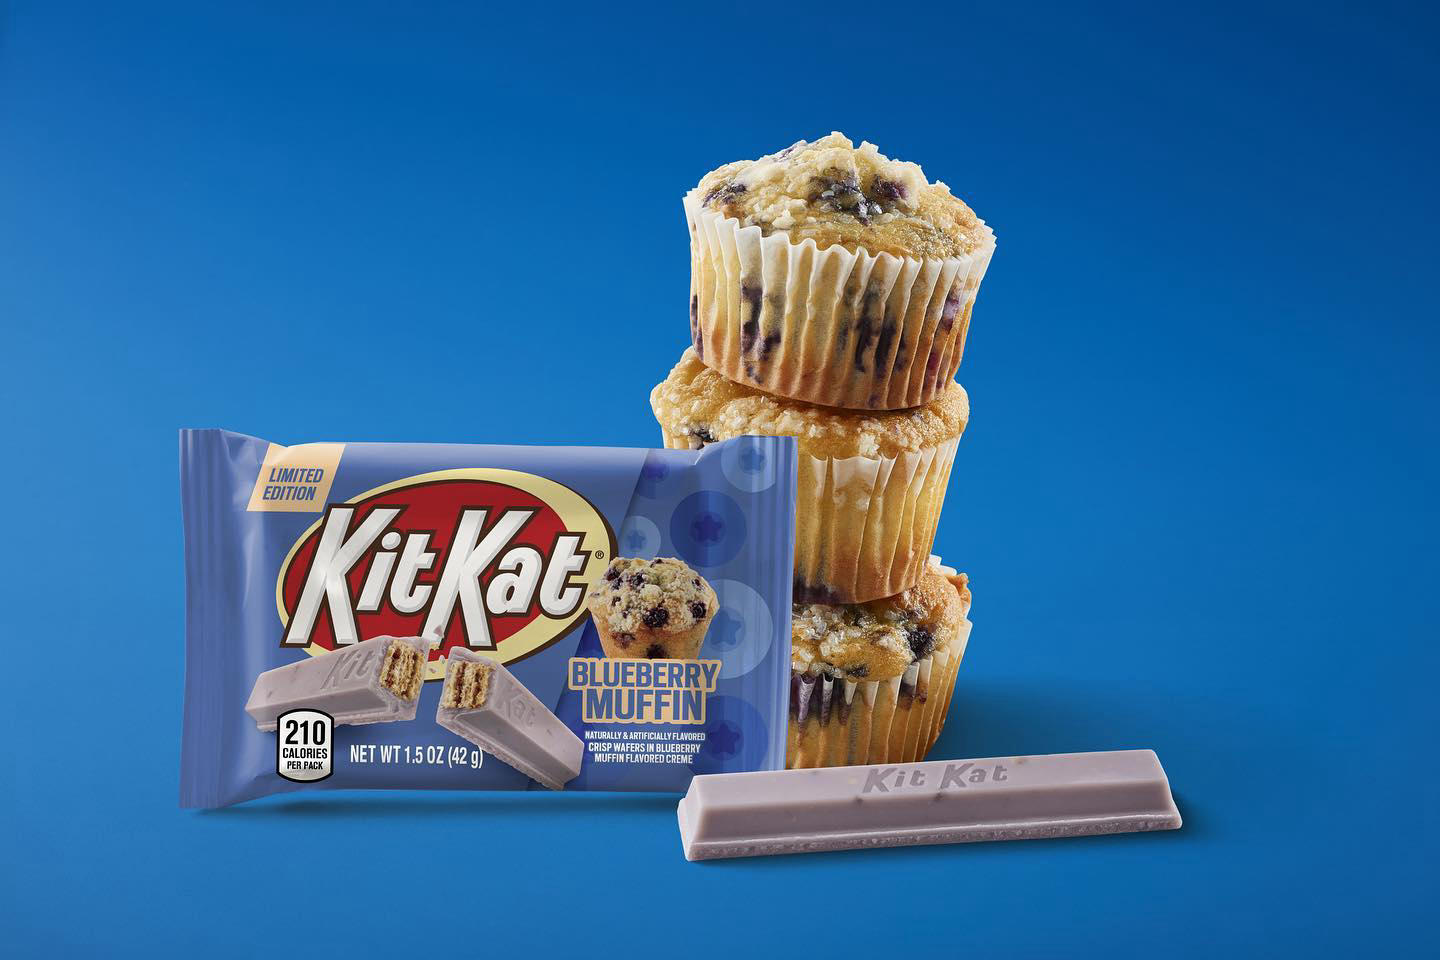 Kit Kat - Fresh baked takes on a whole new meaning